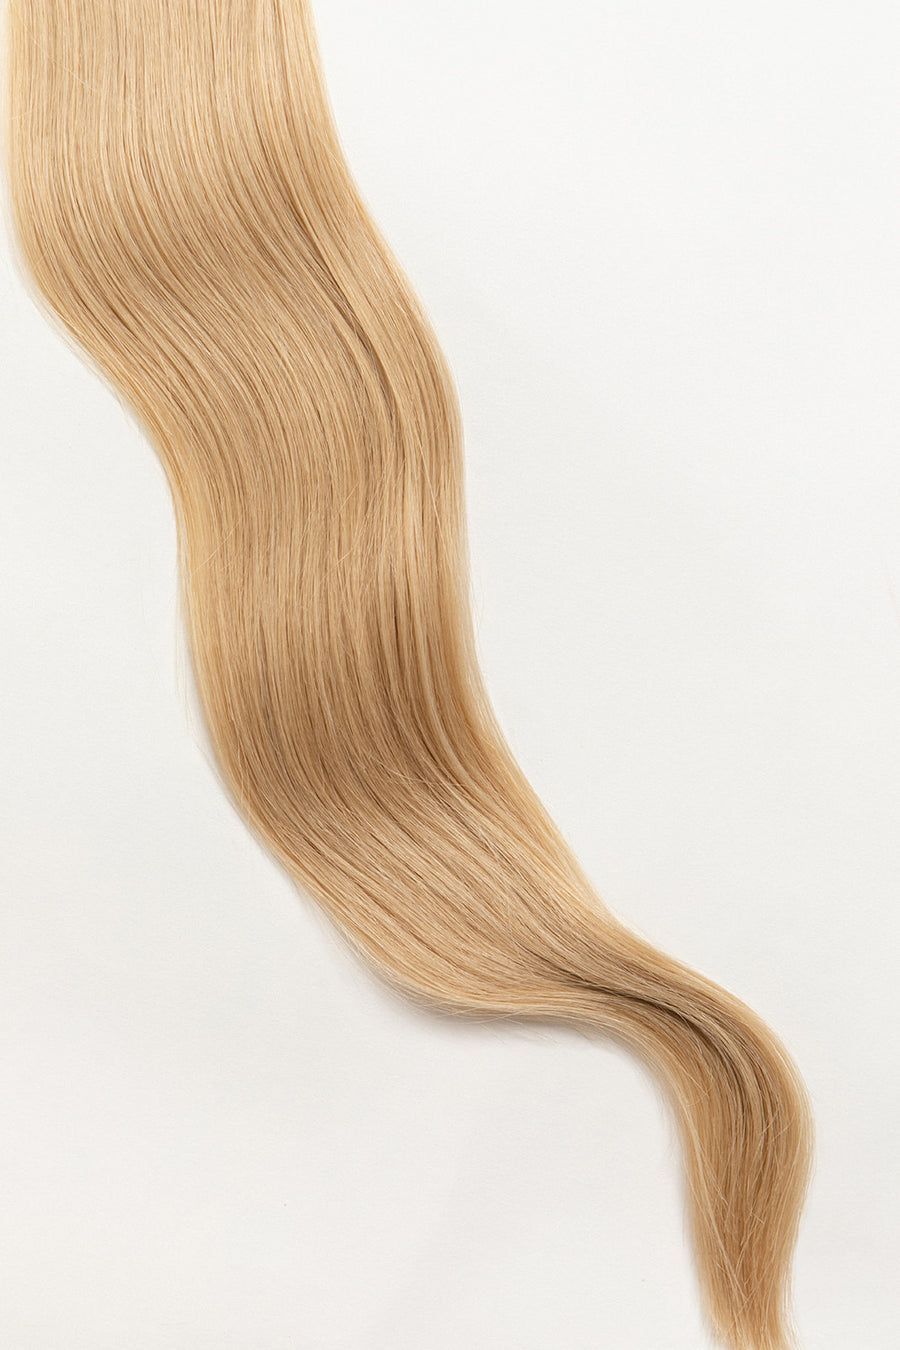 Oat is our soft buttery blonde. You ain’t no run of the mill. Feel your oats.  Stylist lingo: Natural/gold level 9  Harloc Tape-In Extensions are made from ethically sourced, premium, Remy Slavic Hair. These reusable hair extensions can be used to add length, volume, chemical-free colour, or to correct or enhance a haircut. Available in 16 beautiful shades. Combine multiple colours to create a custom colour blend and perfect match.